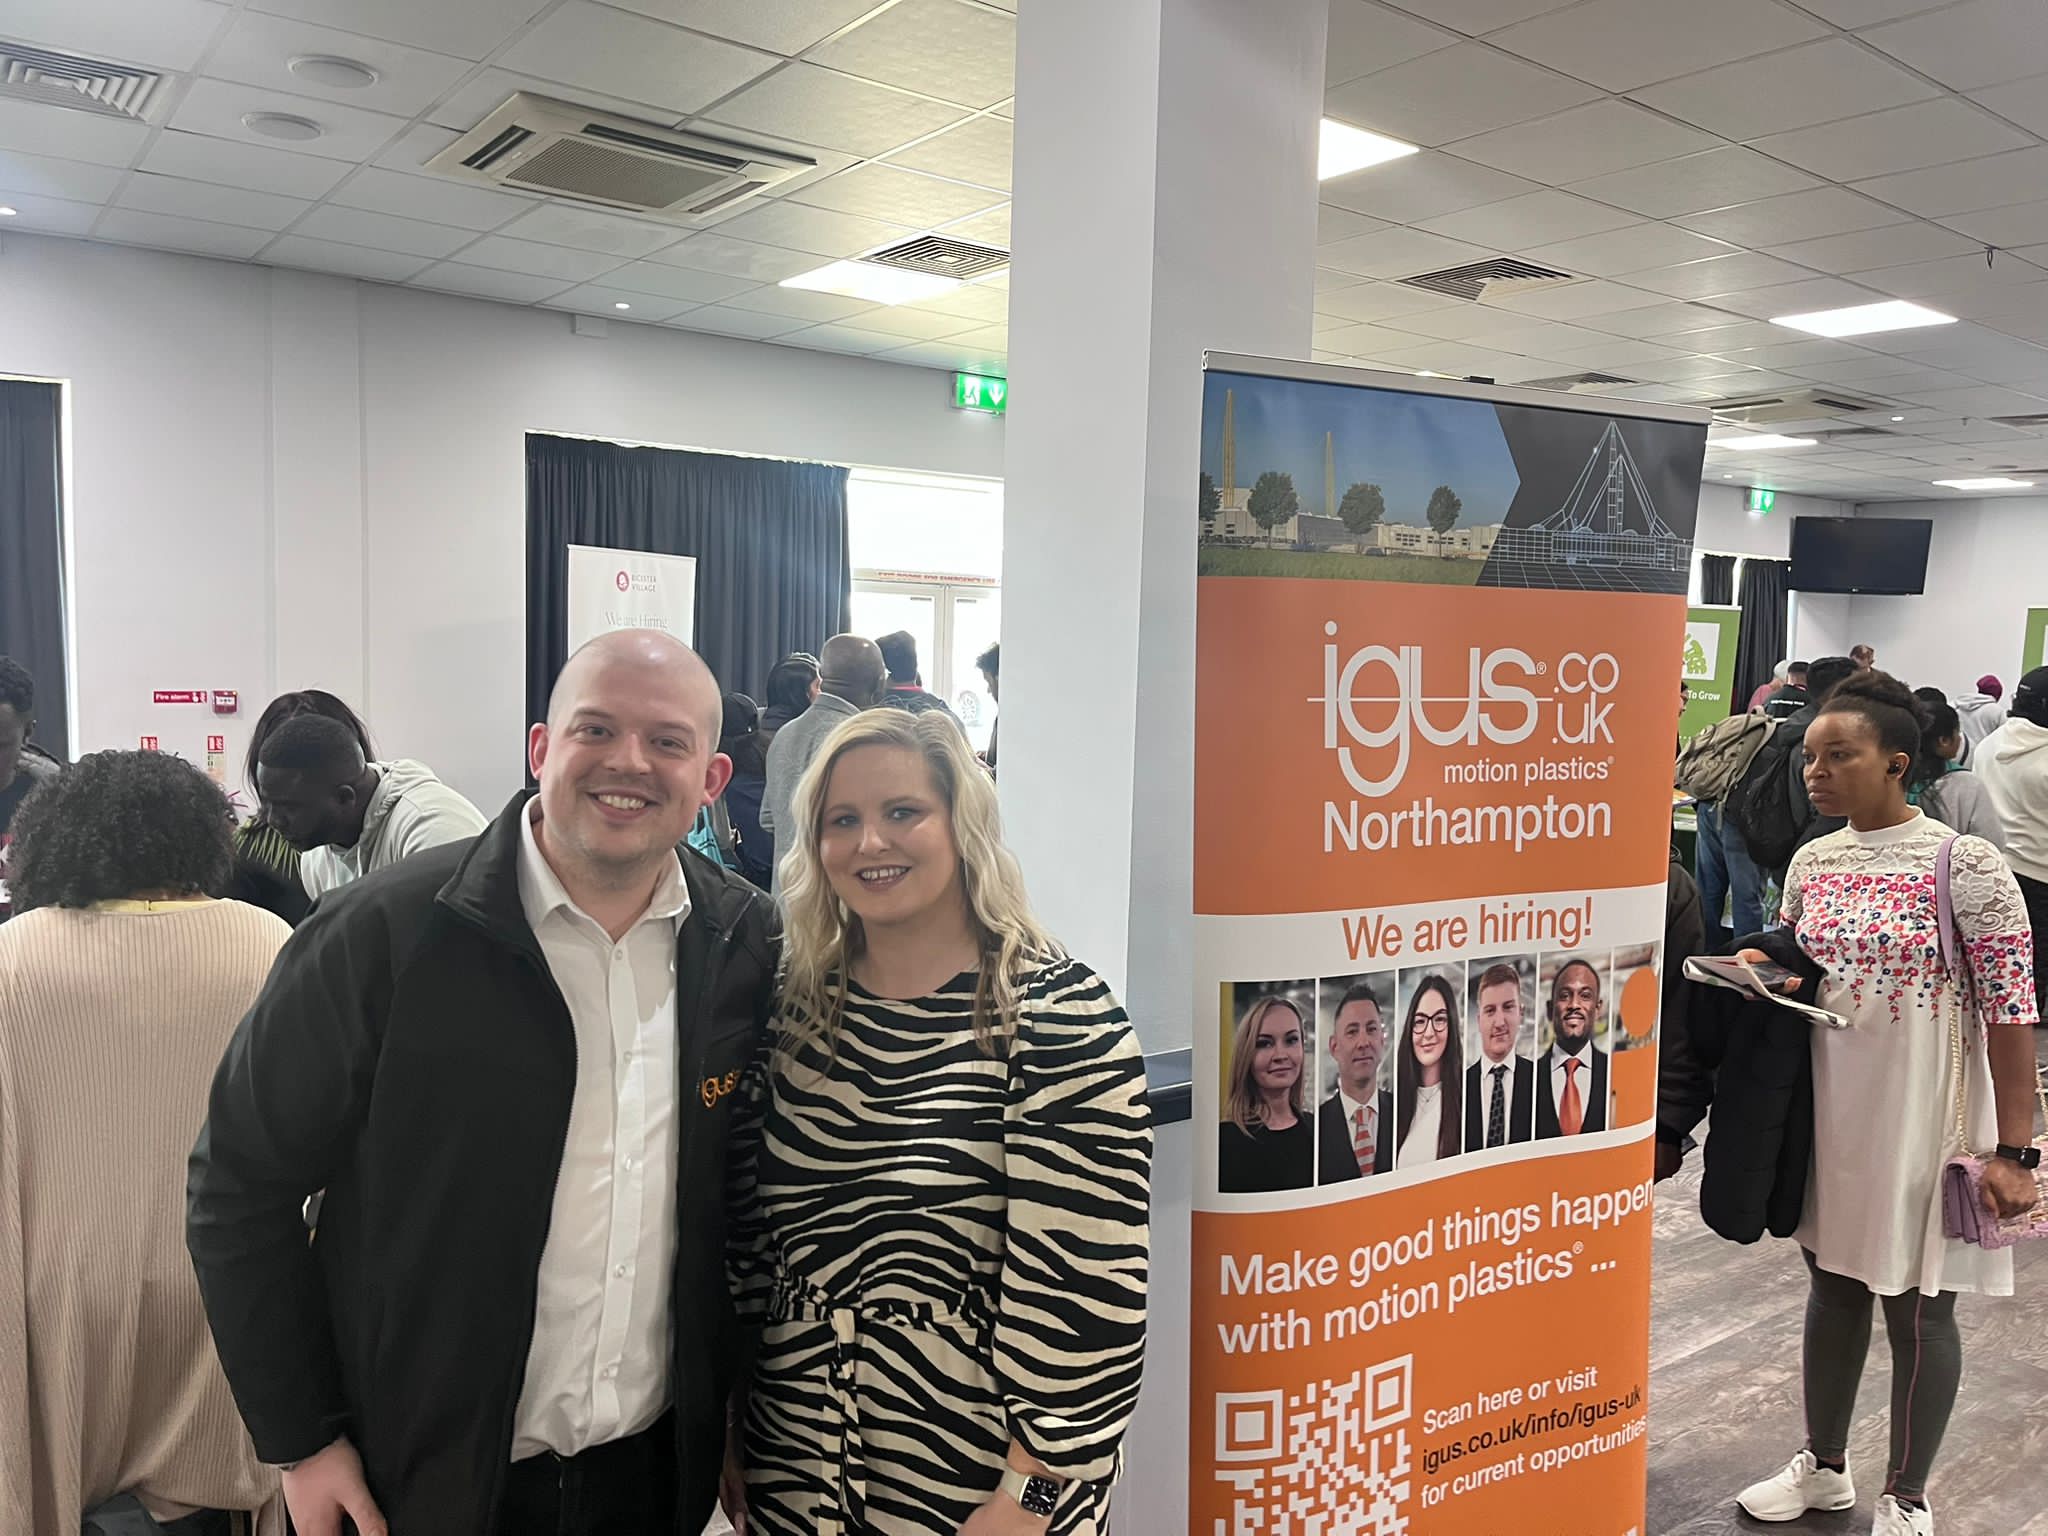 Igus at our event in Northampton